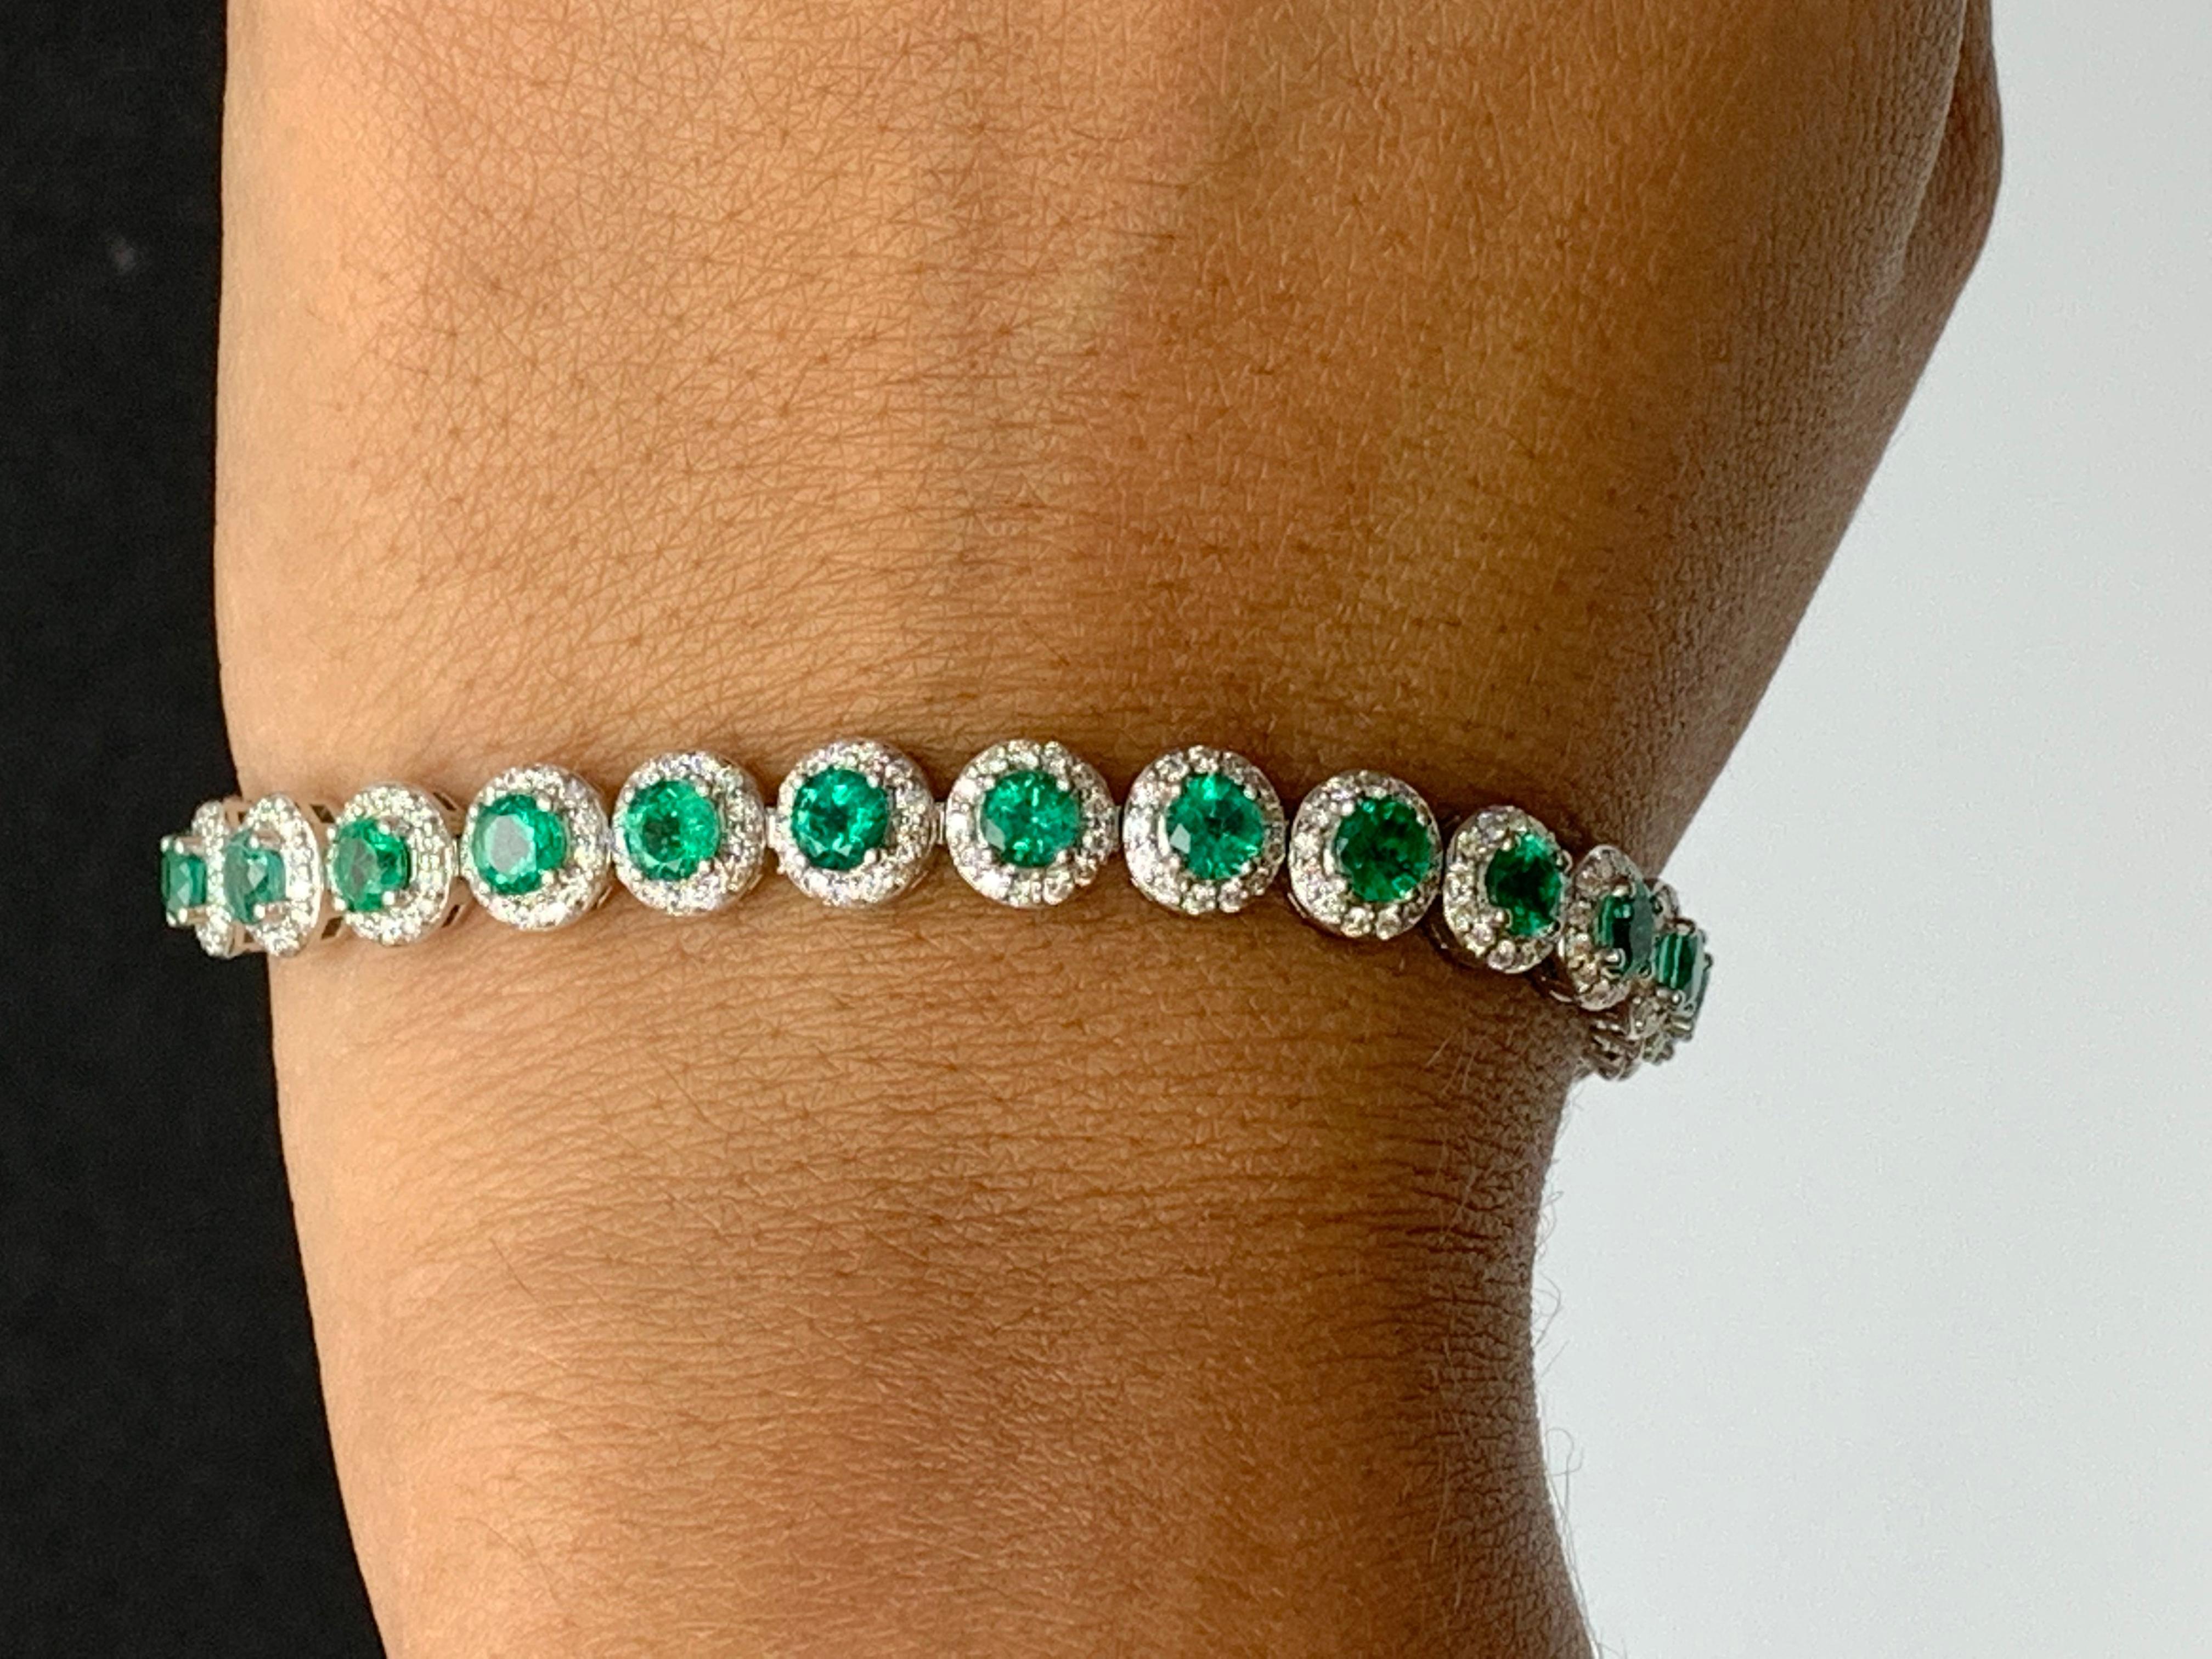 6.94 Carat Emerald and Diamond Halo Tennis Bracelet in 14k White Gold For Sale 7